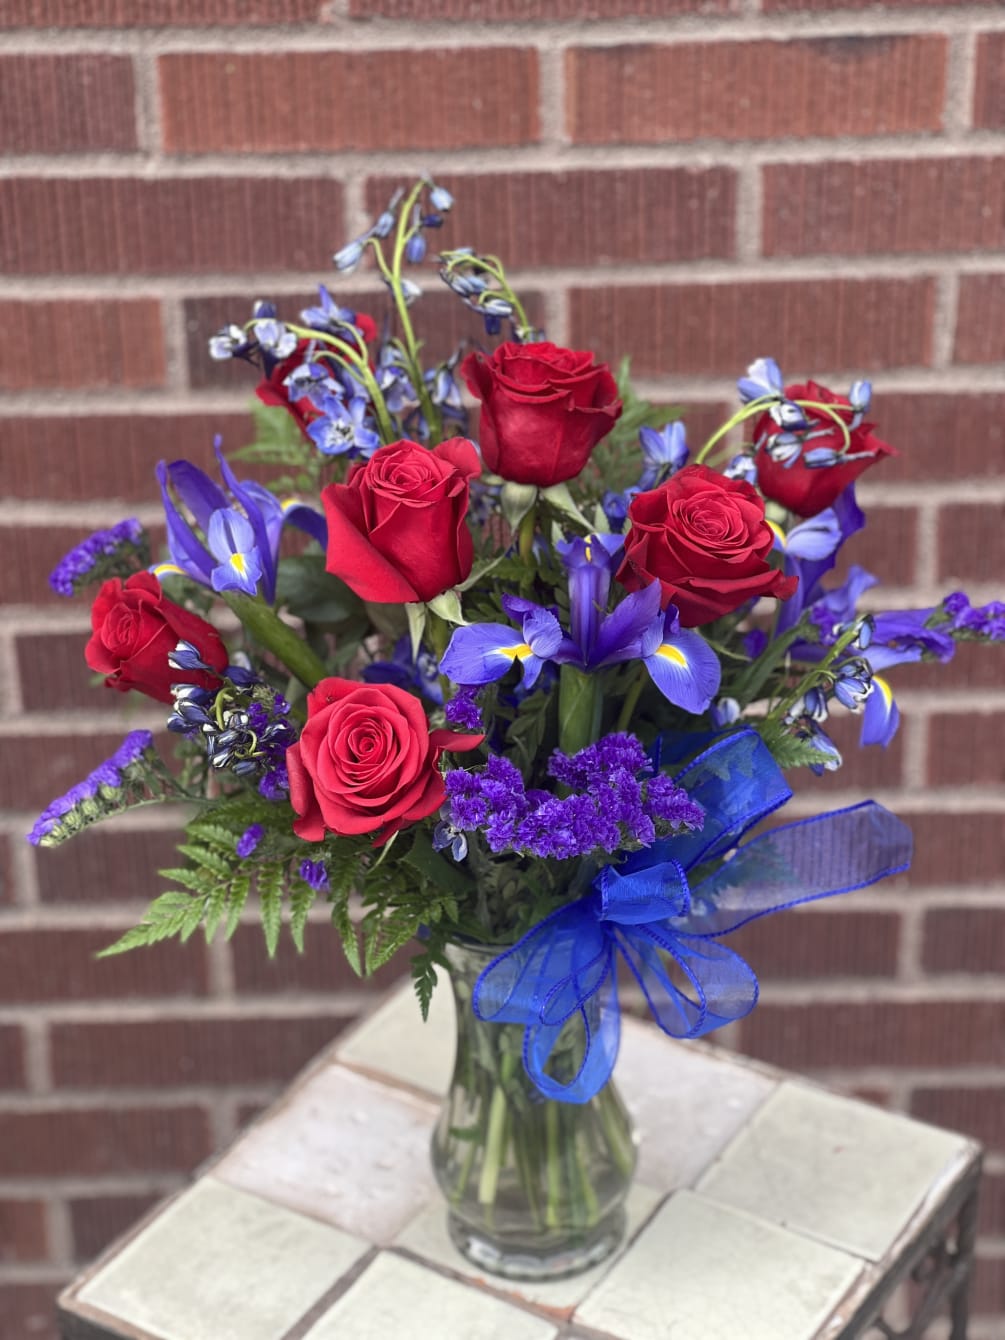 Put together by one of our local gals, this arrangement is a